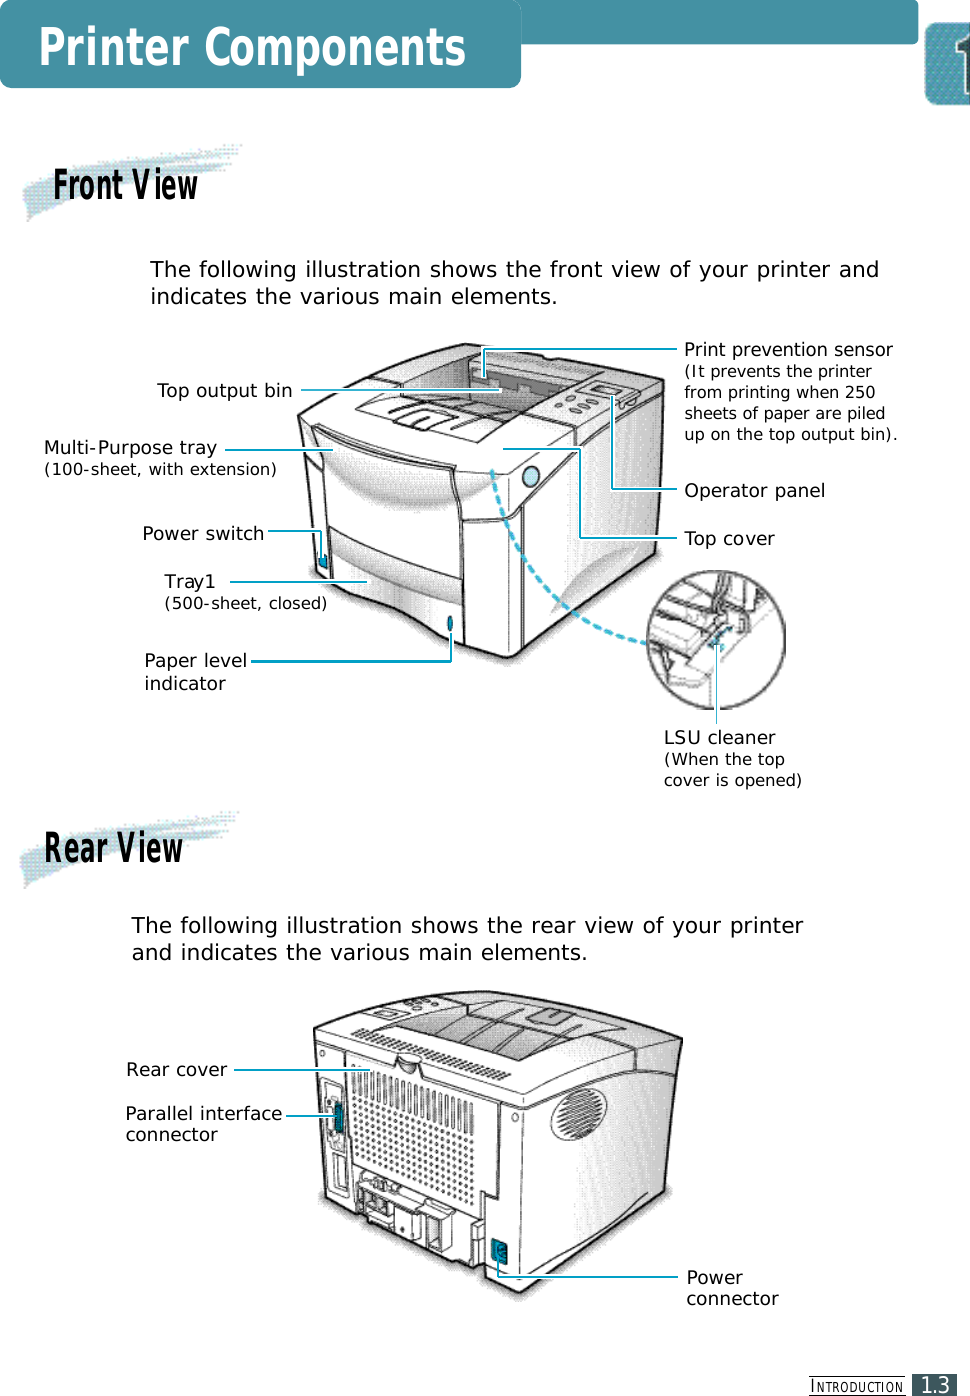 The following illustration shows the front view of your printer and indicates the various main elements.IN T R O D U C T I O N1.3Top output binOperator panelPrint prevention sensor(It prevents the printer from printing when 250 sheets of paper are piled up on the top output bin).Paper level indicatorTray1(500-sheet, closed)Top coverMulti-Purpose tray(100-sheet, with extension)Power switchThe following illustration shows the rear view of your printer and indicates the various main elements.Rear coverPowerconnectorParallel interface connectorLSU cleaner(When the top cover is opened)Printer ComponentsFront ViewRear View